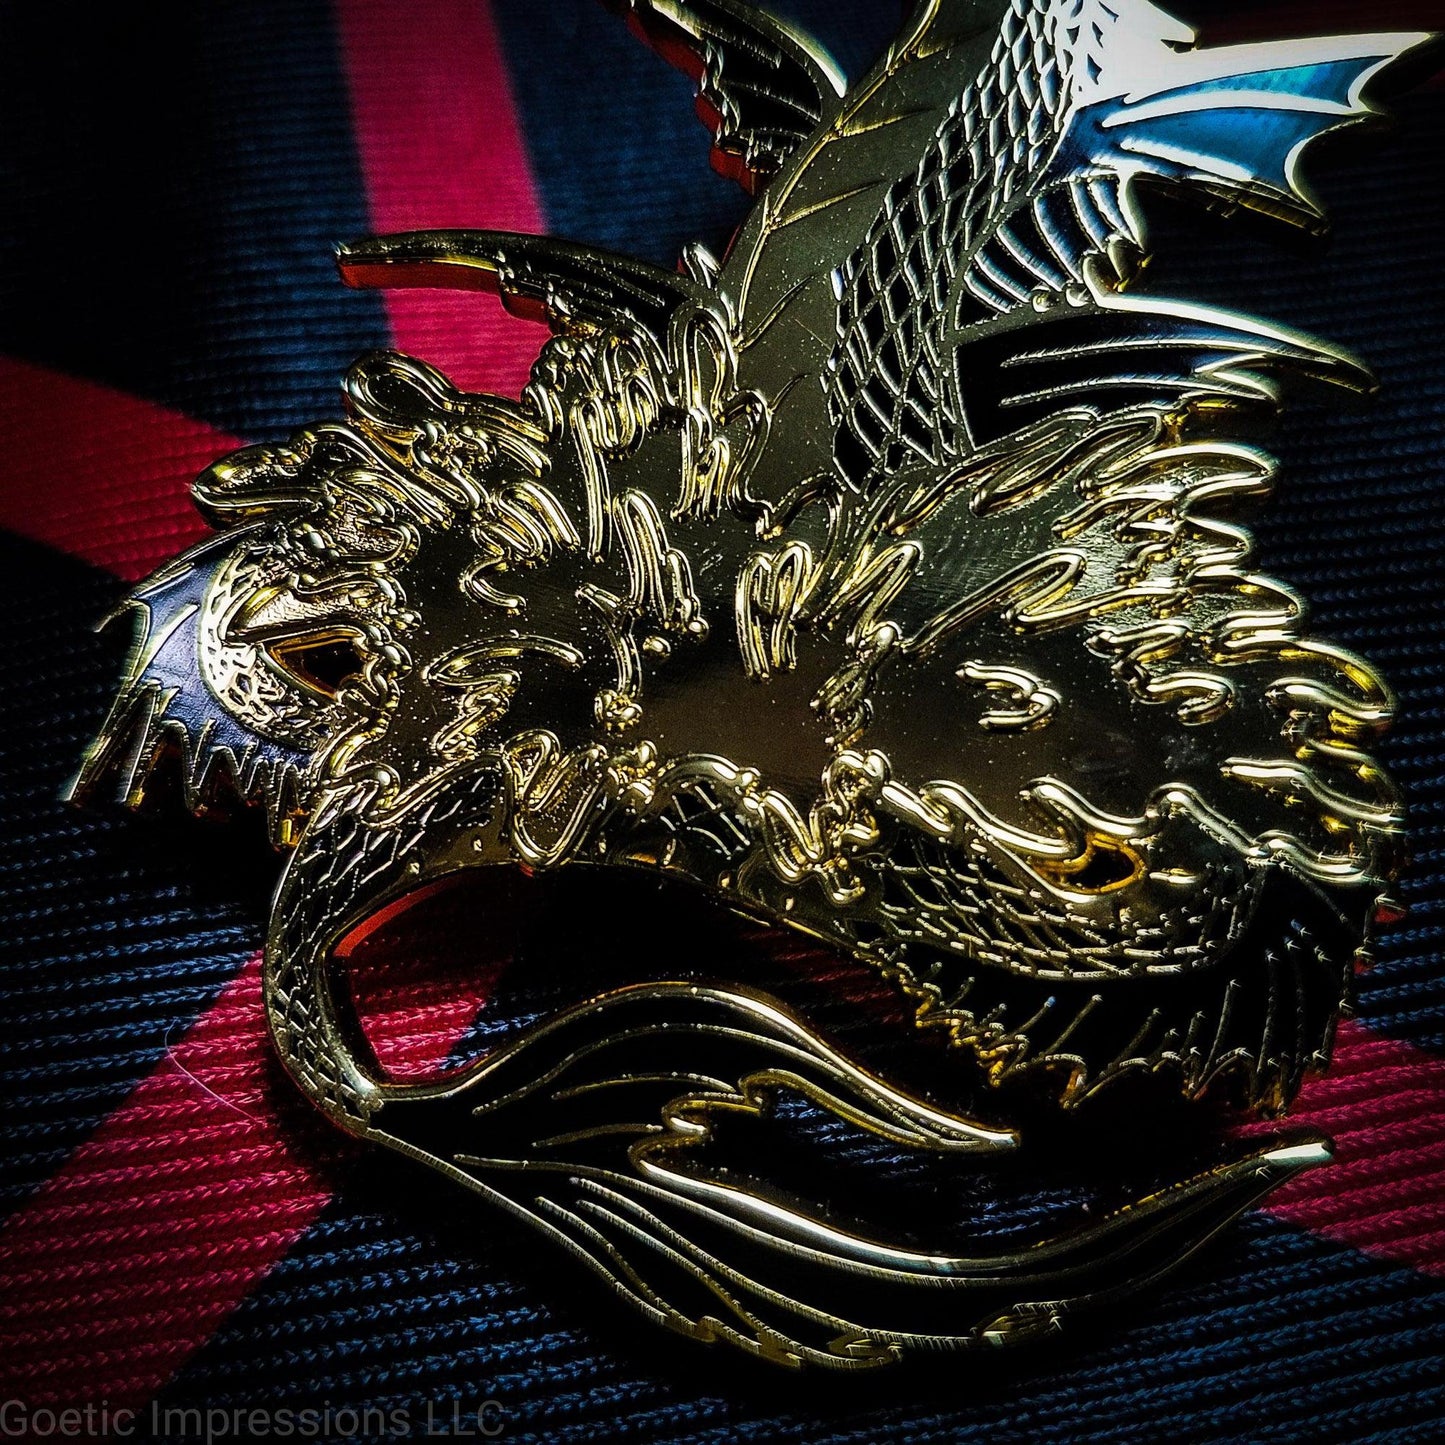 A close up of a Leviathan pin showing detail.